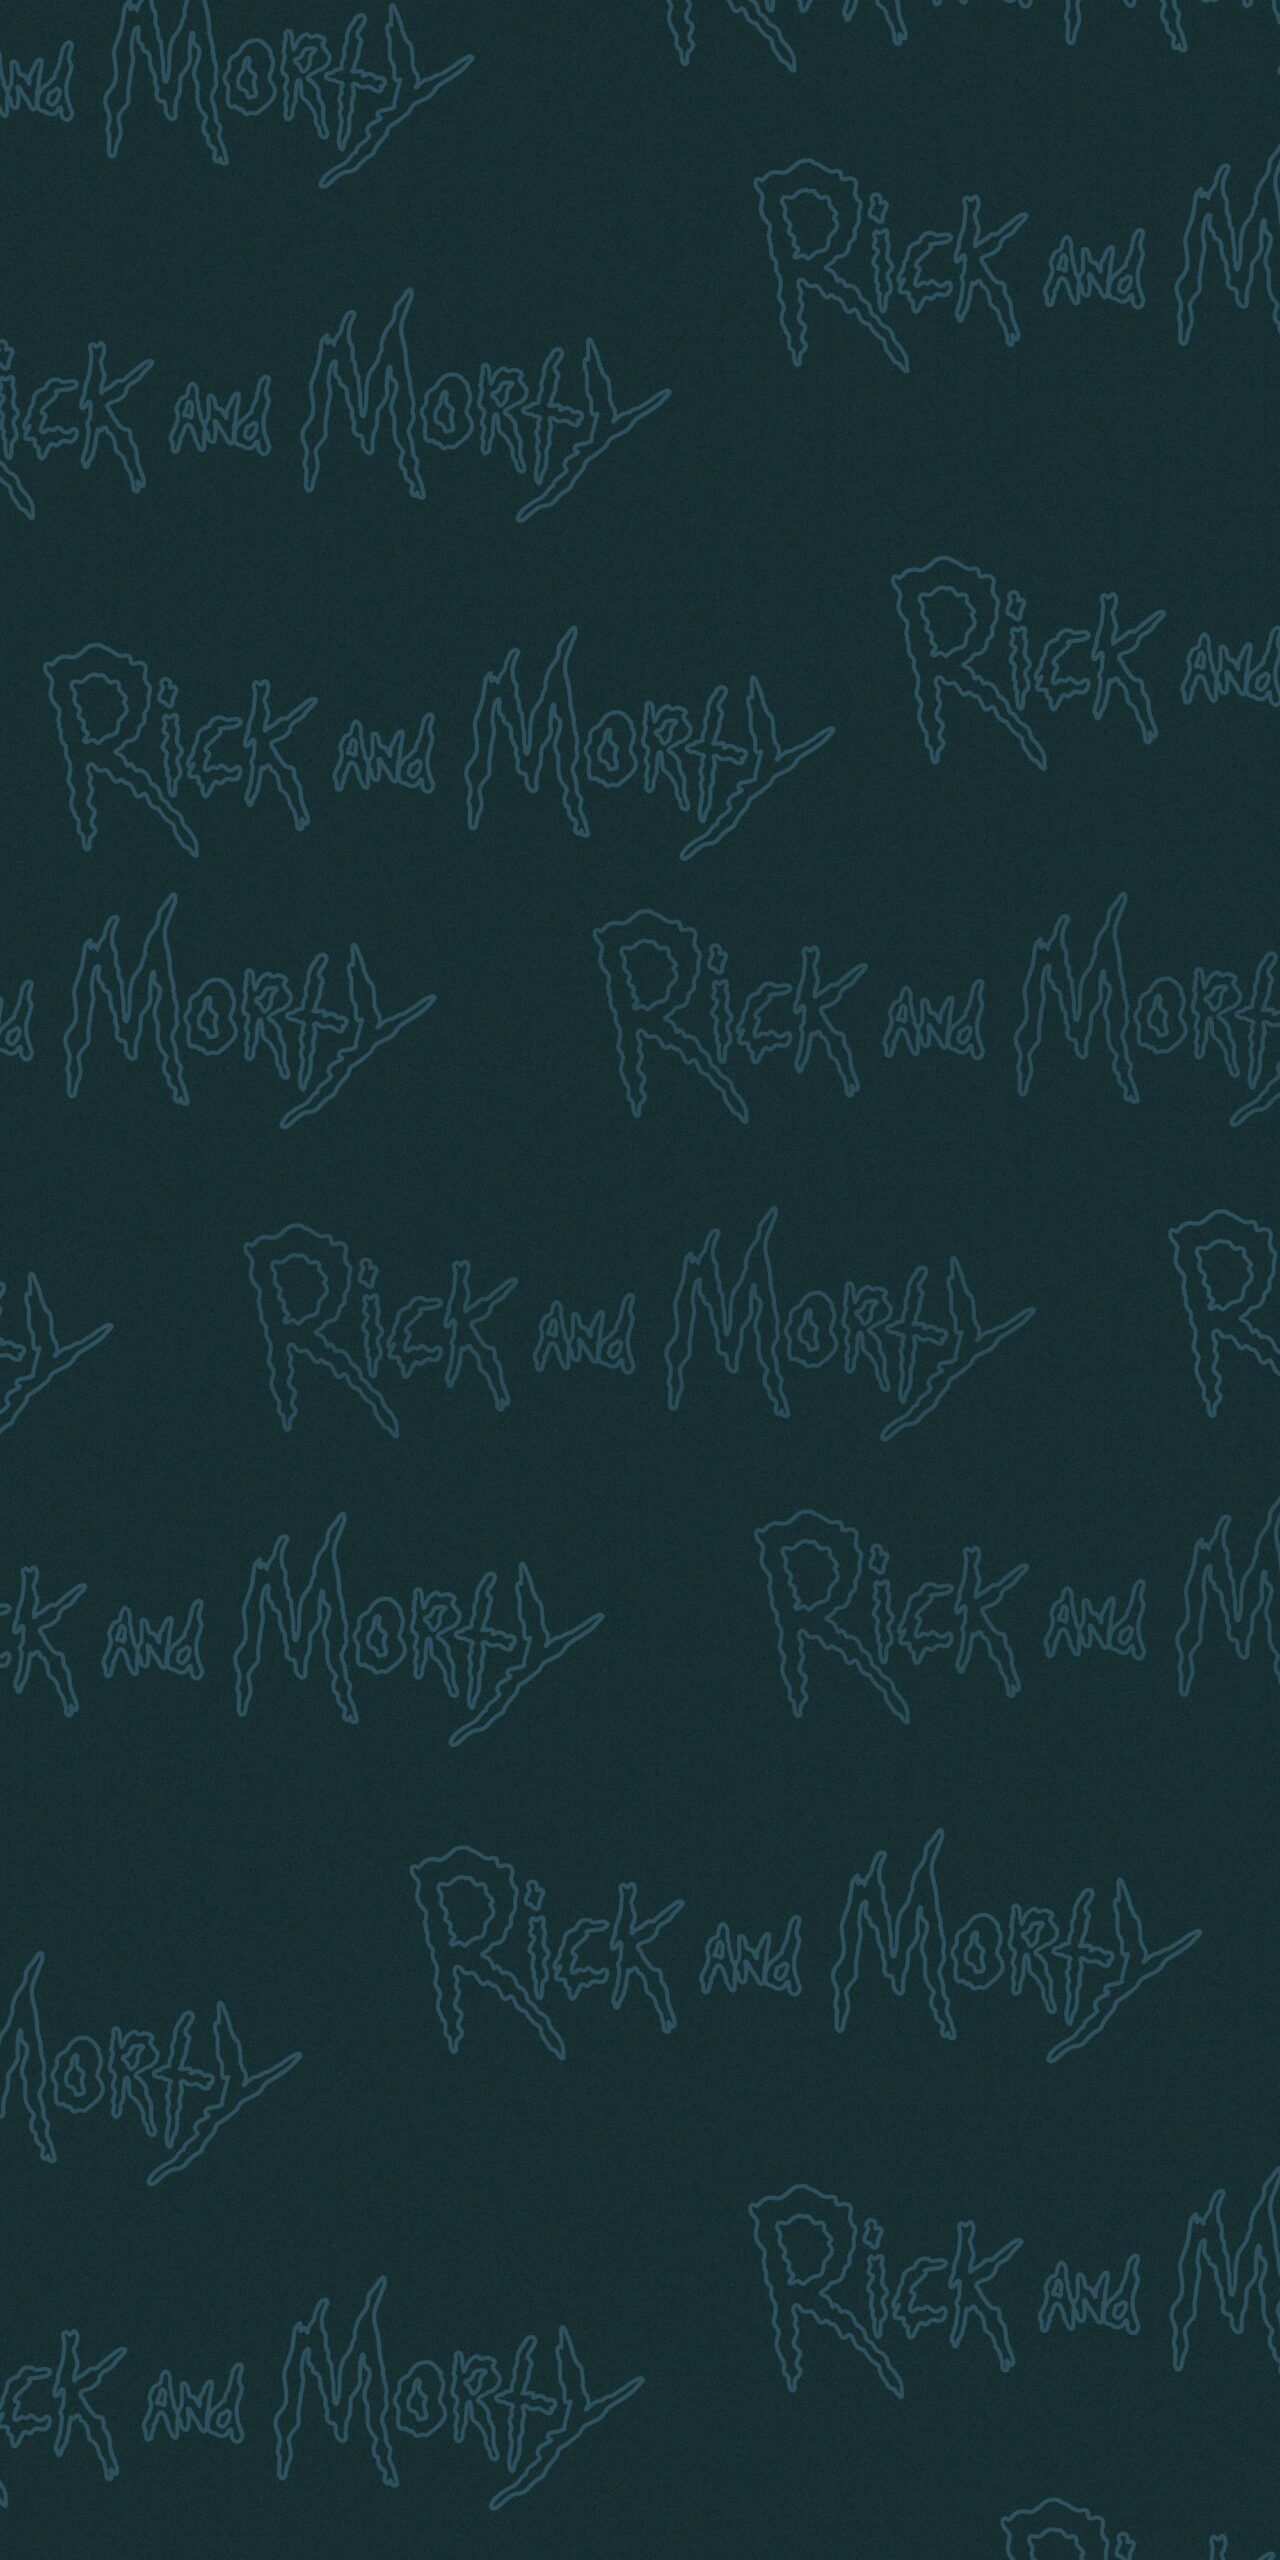 rick and morty logo blue background wallpaper